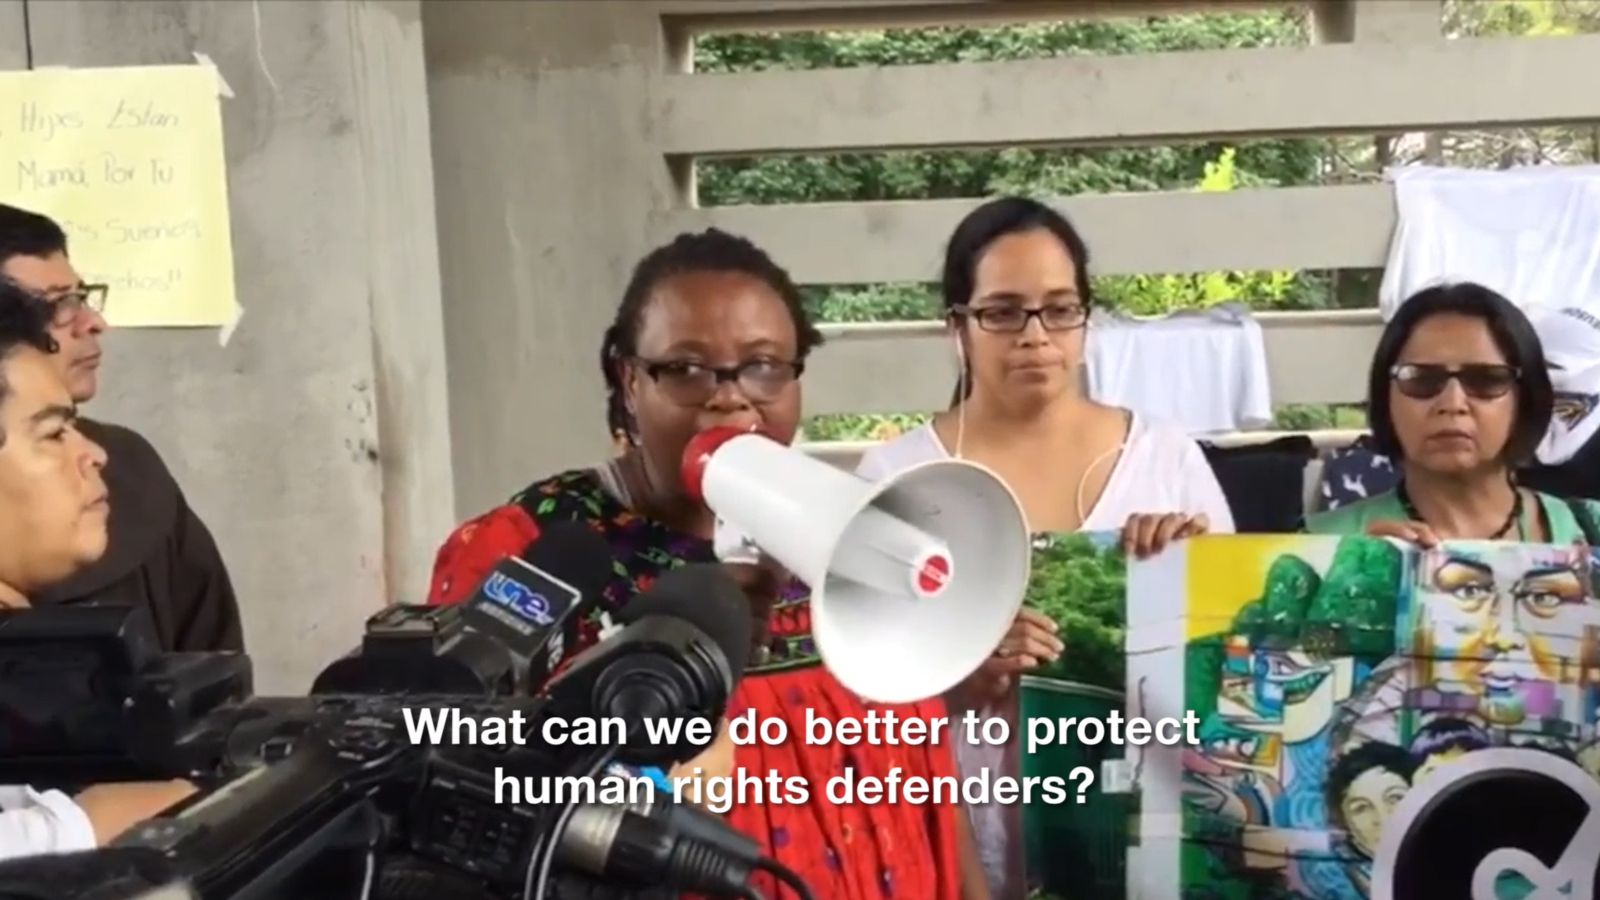 New threats against human rights defenders require new kinds of protection